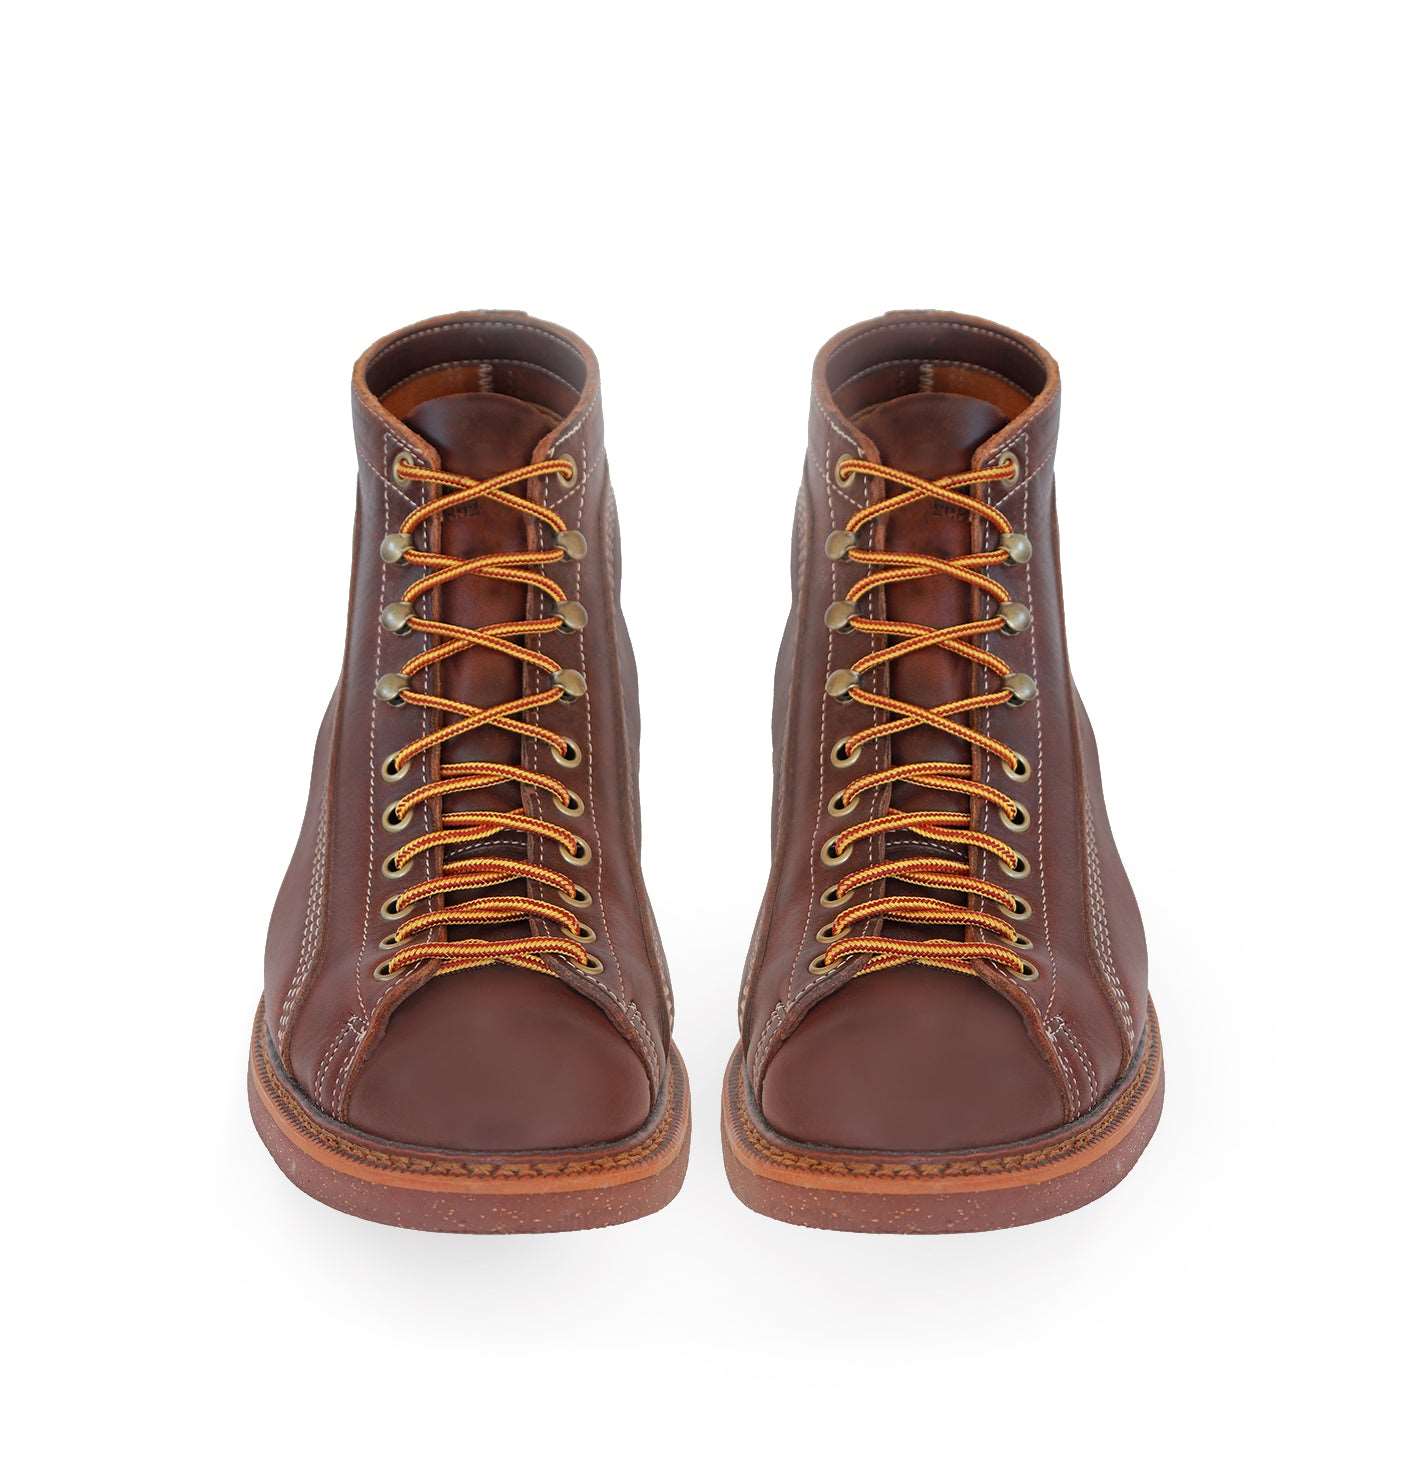 Boots with matte brown leather